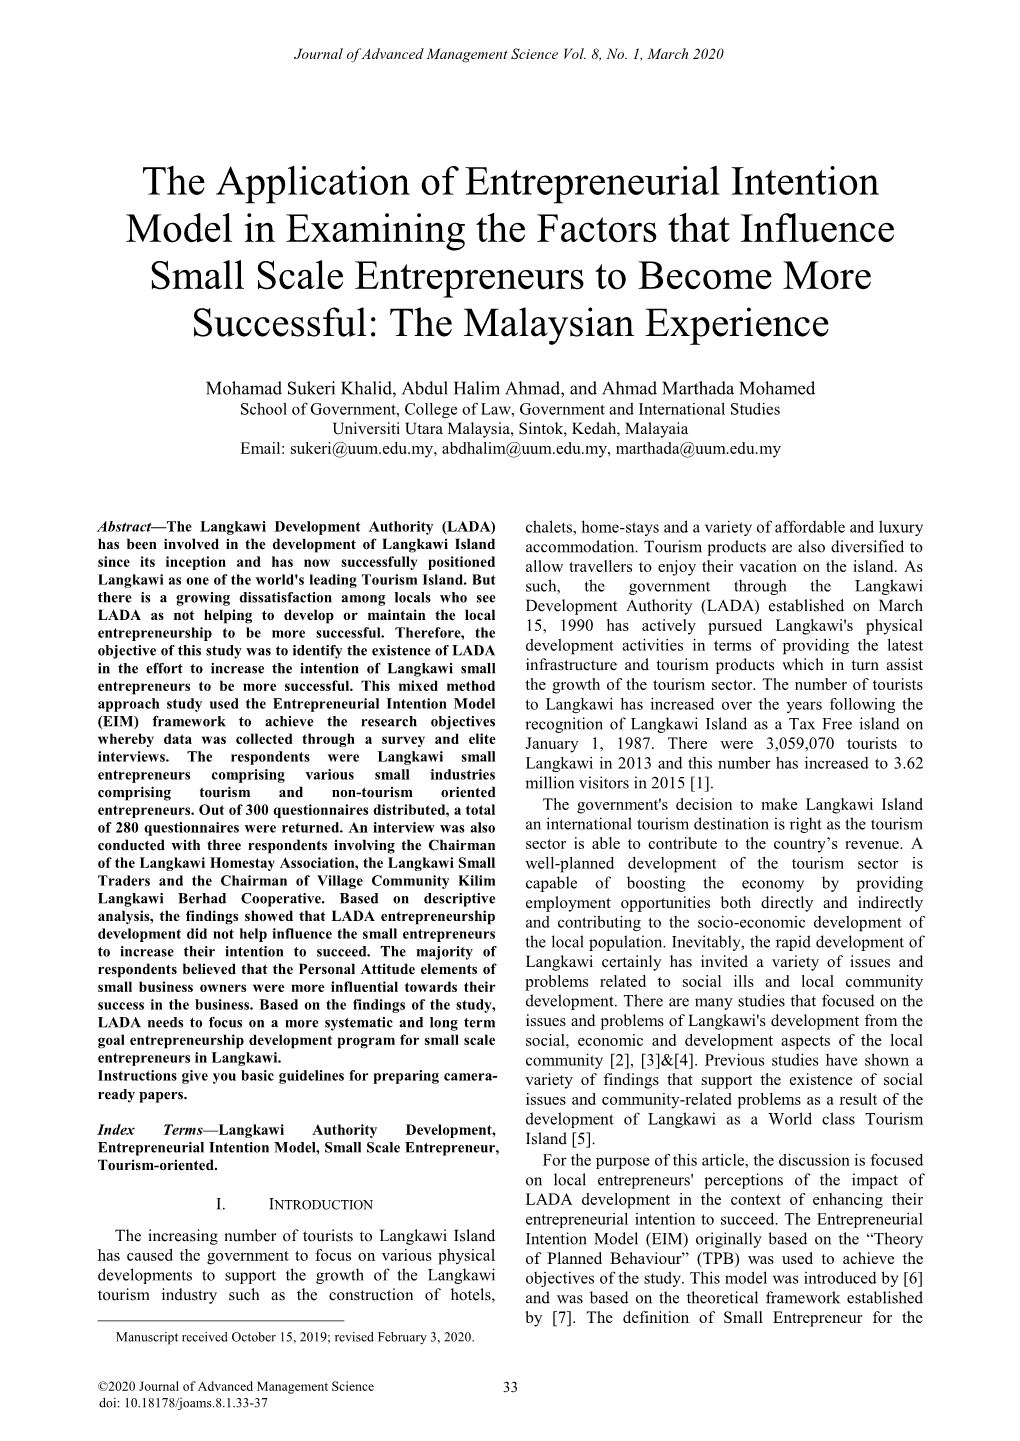 The Application of Entrepreneurial Intention Model in Examining the Factors That Influence Small Scale Entrepreneurs to Become M